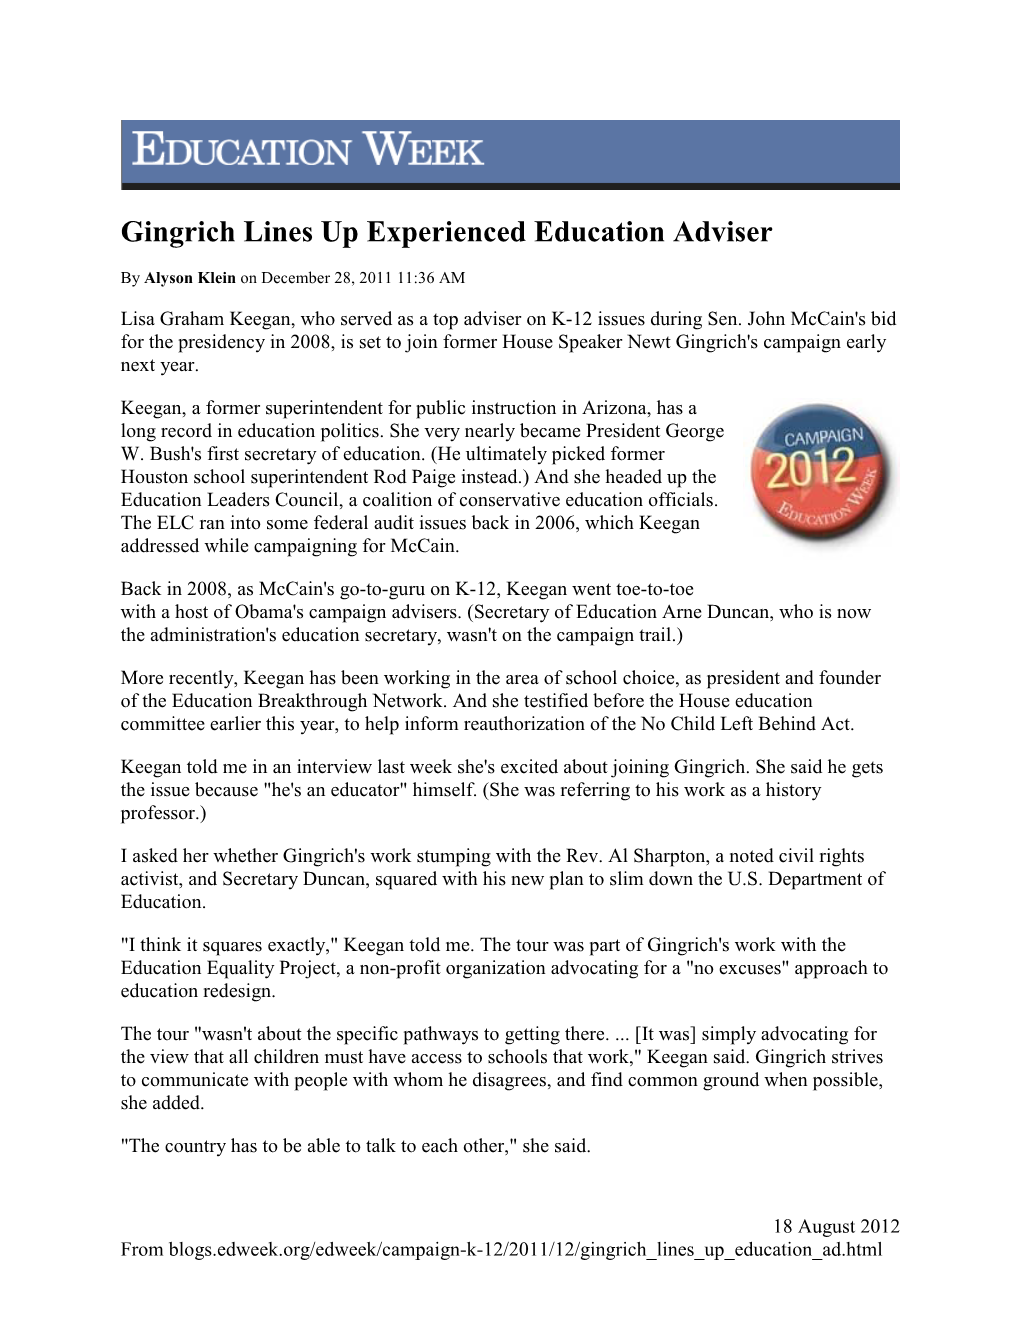 Gingrich Lines up Experienced Education Adviser